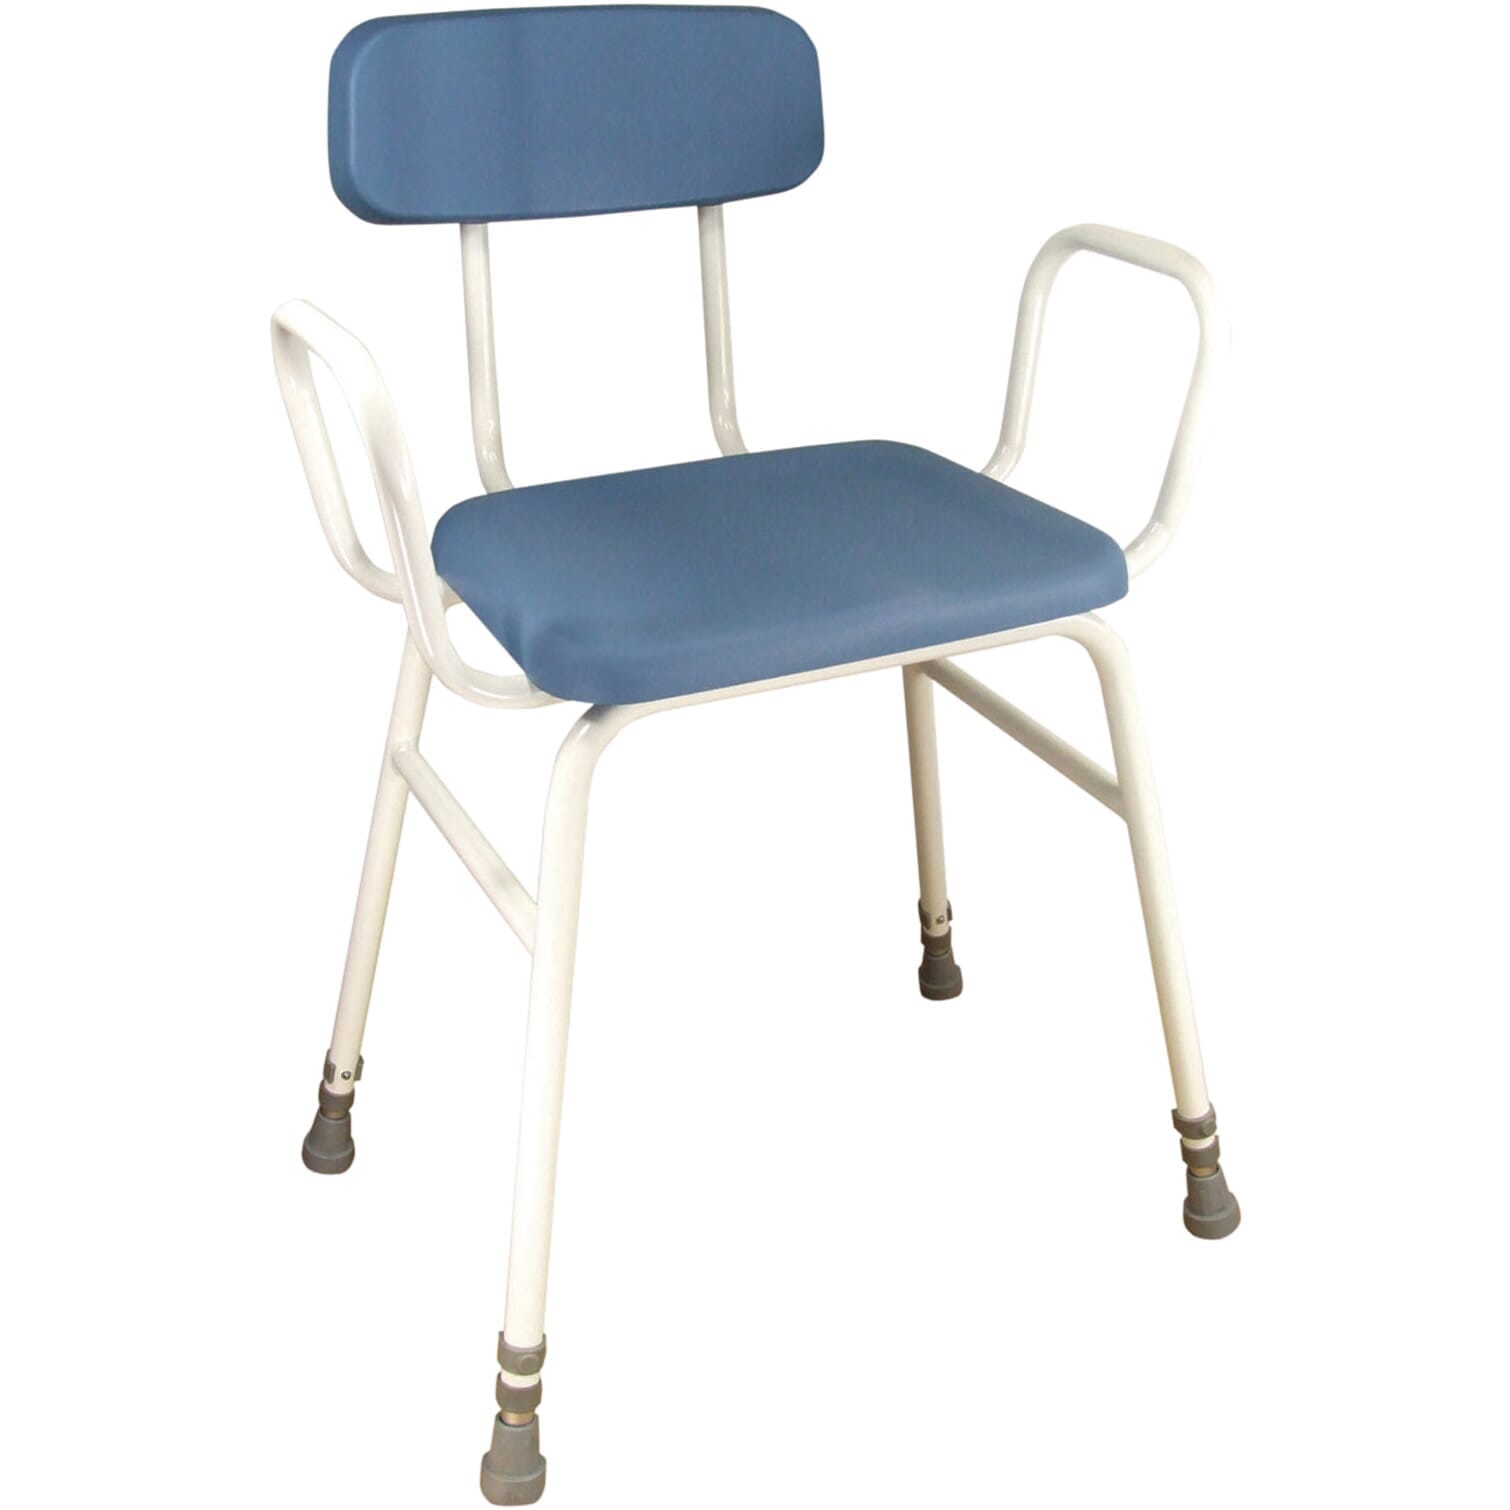 View Comfy Padded Perching Stool Stool with Arms Padded Back information